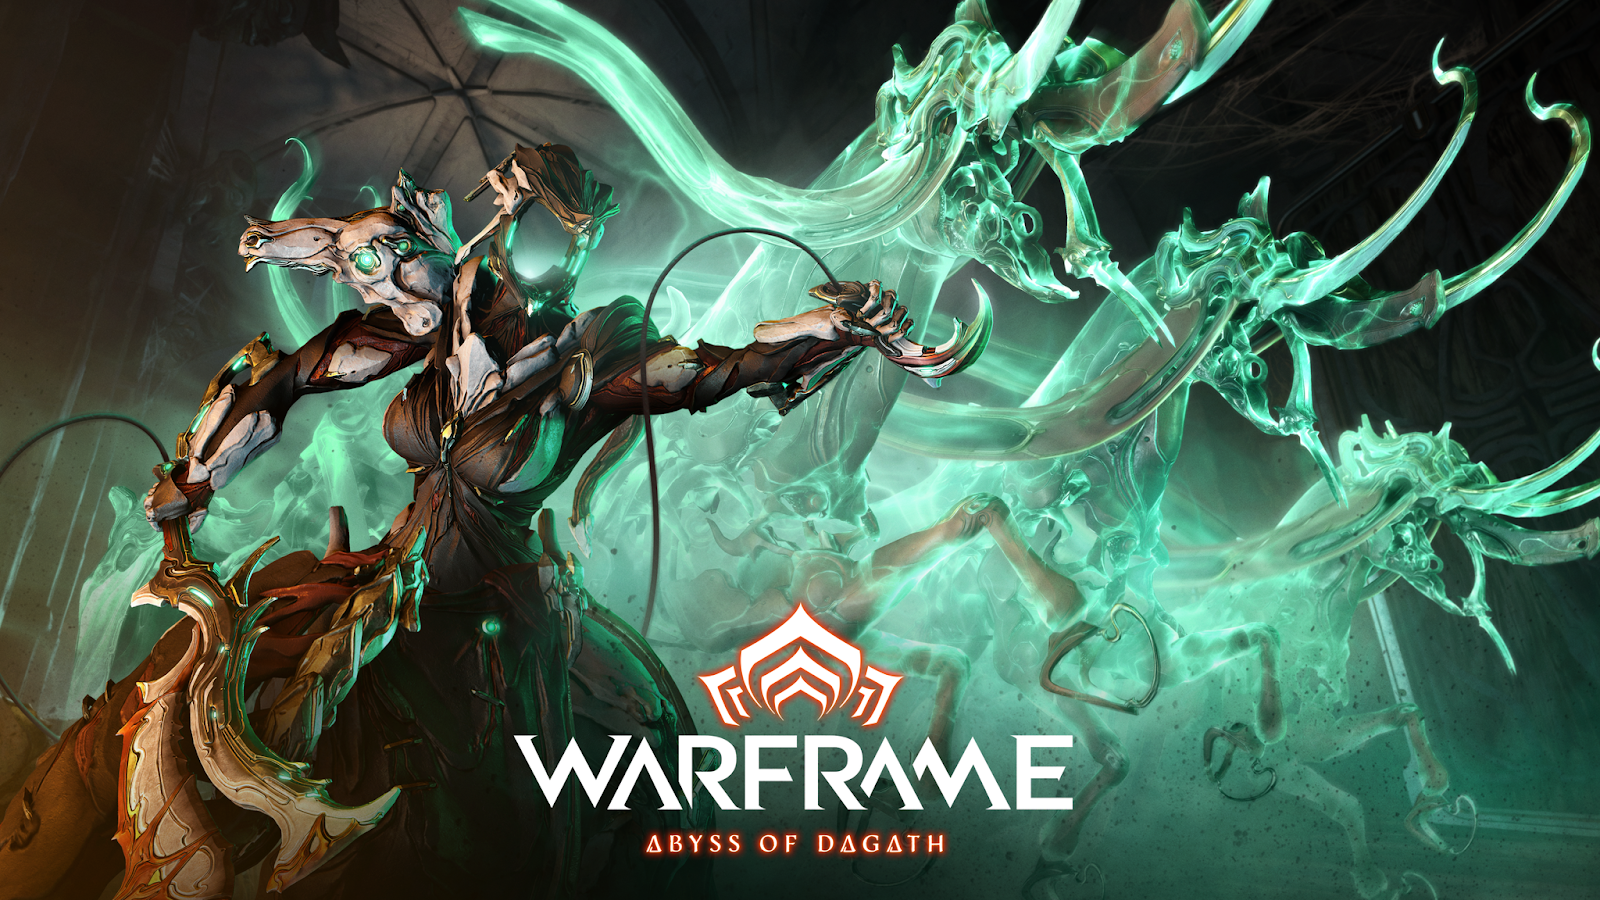 Warframe's 'Abyss of Dagath' Update Emerges from the Spectral Realm